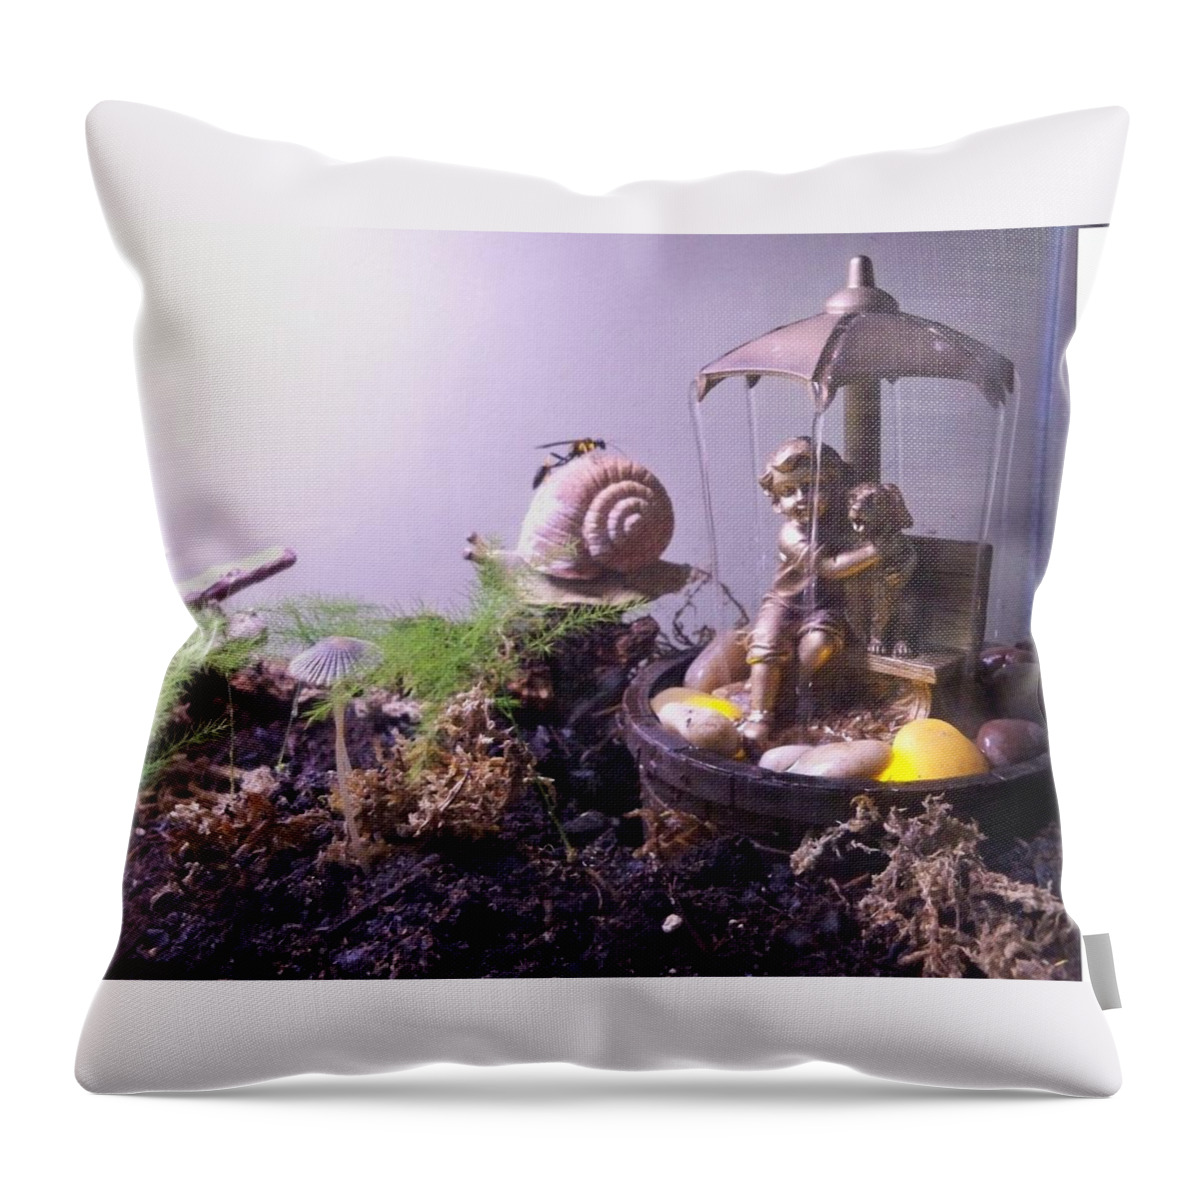 Mushrooms Throw Pillow featuring the photograph Fantasy 3 by Nancy Graham